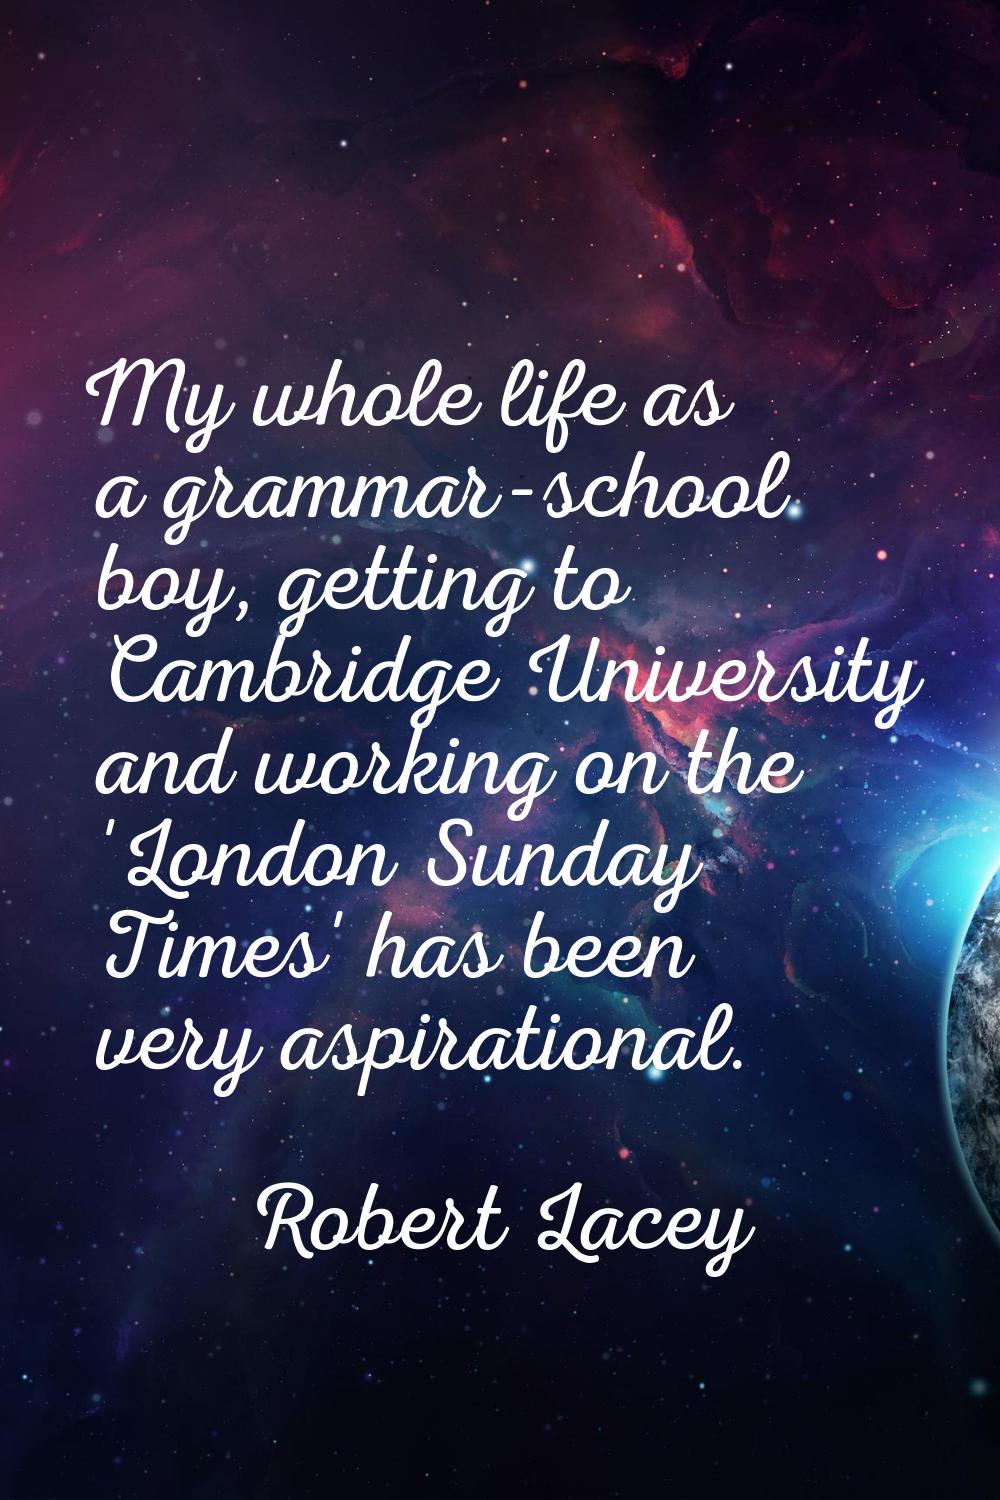 My whole life as a grammar-school boy, getting to Cambridge University and working on the 'London S